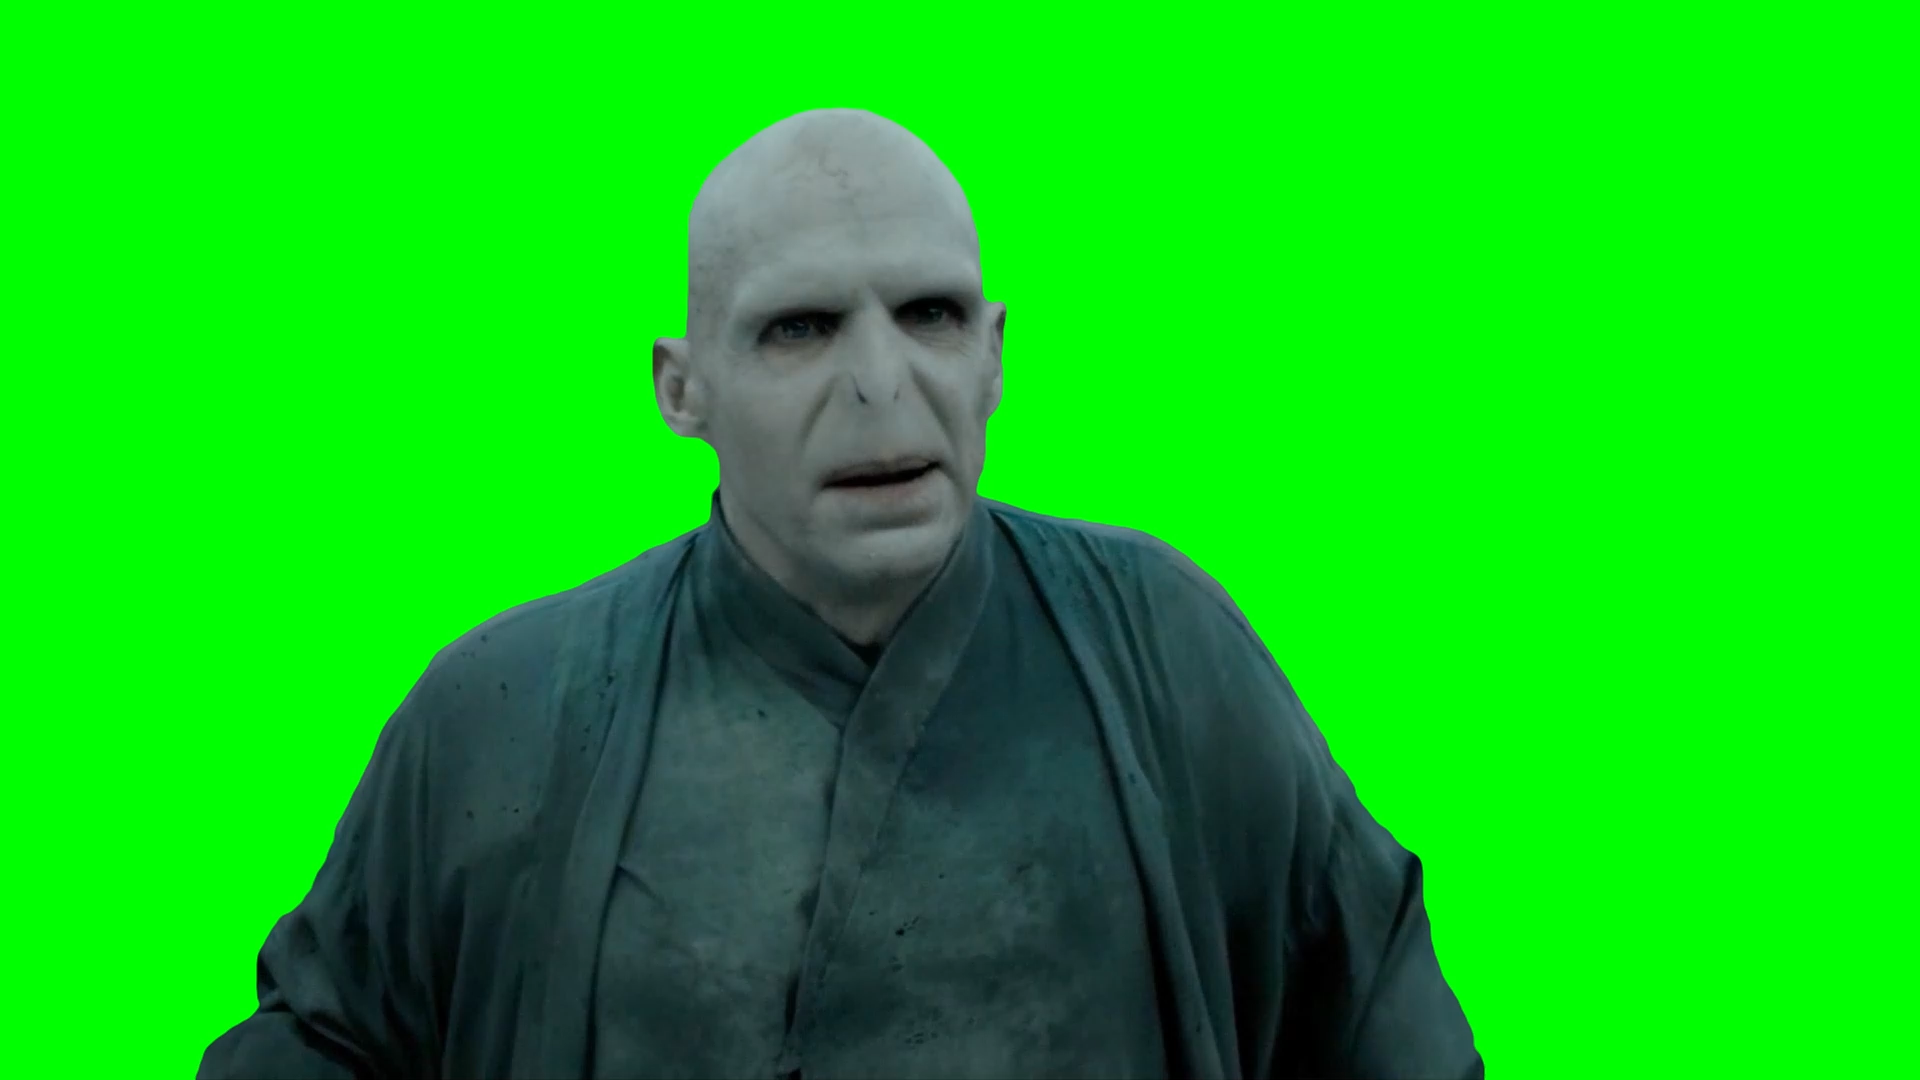 Voldemort - You put your faith in me (Green Screen)